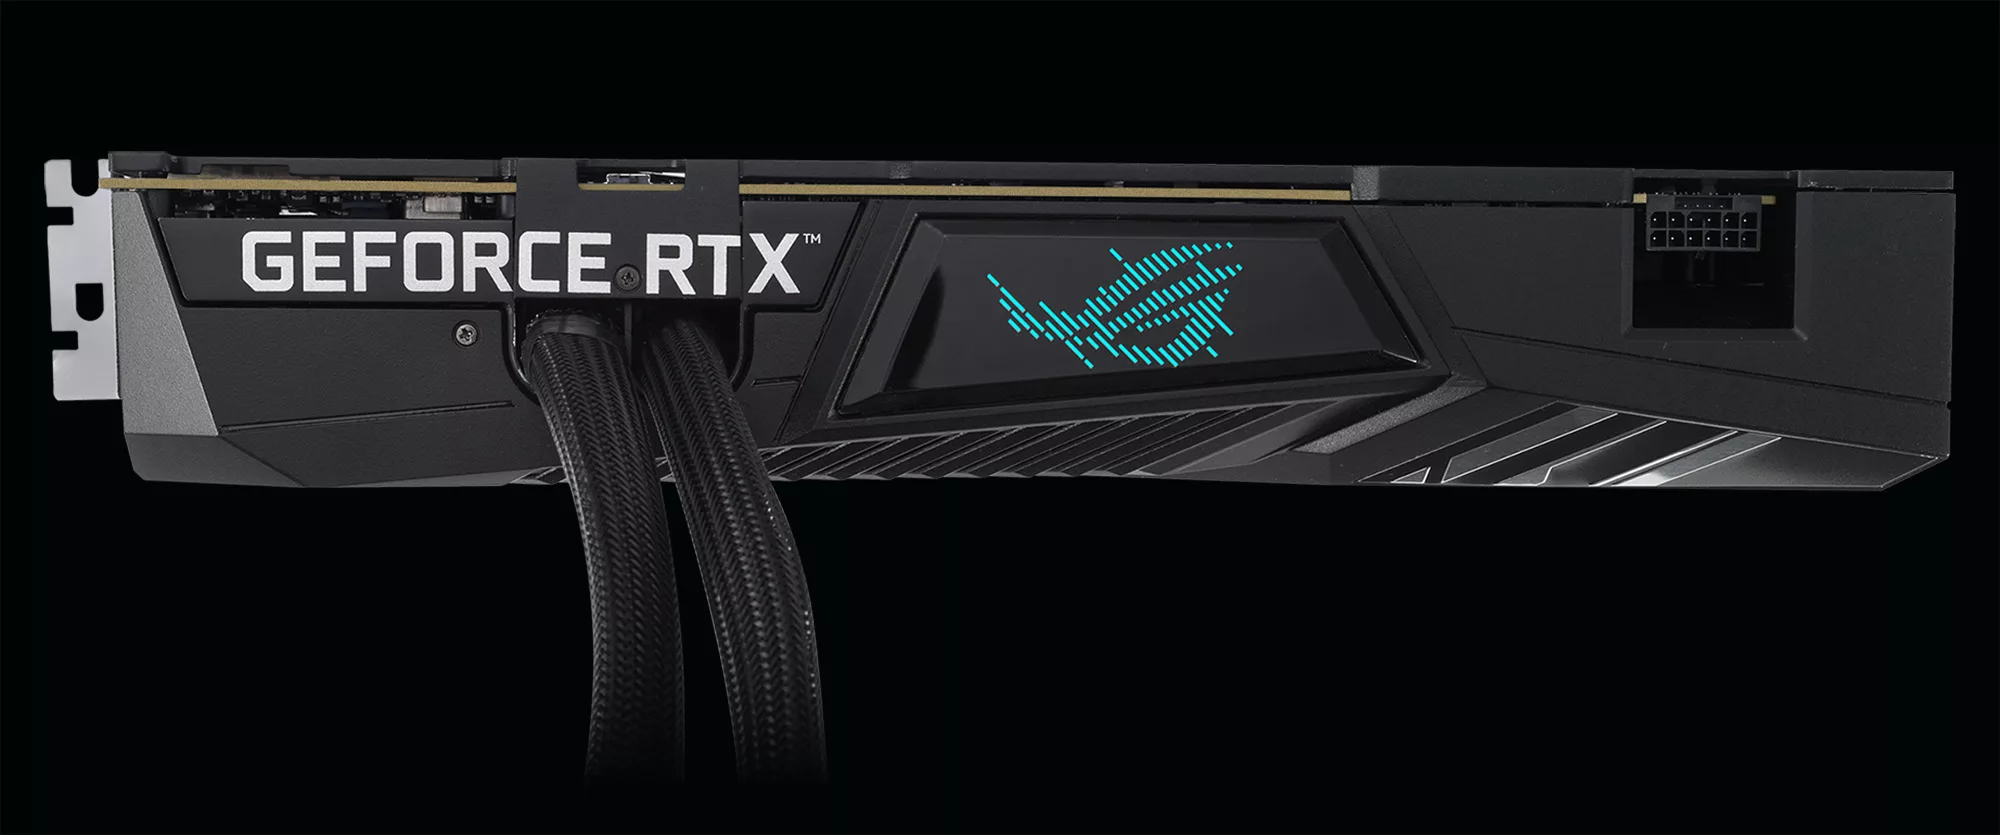 ROG-Strix-LC-GeForce-RTX-4090-angled-top-view-showing-off-the-ARGB-element